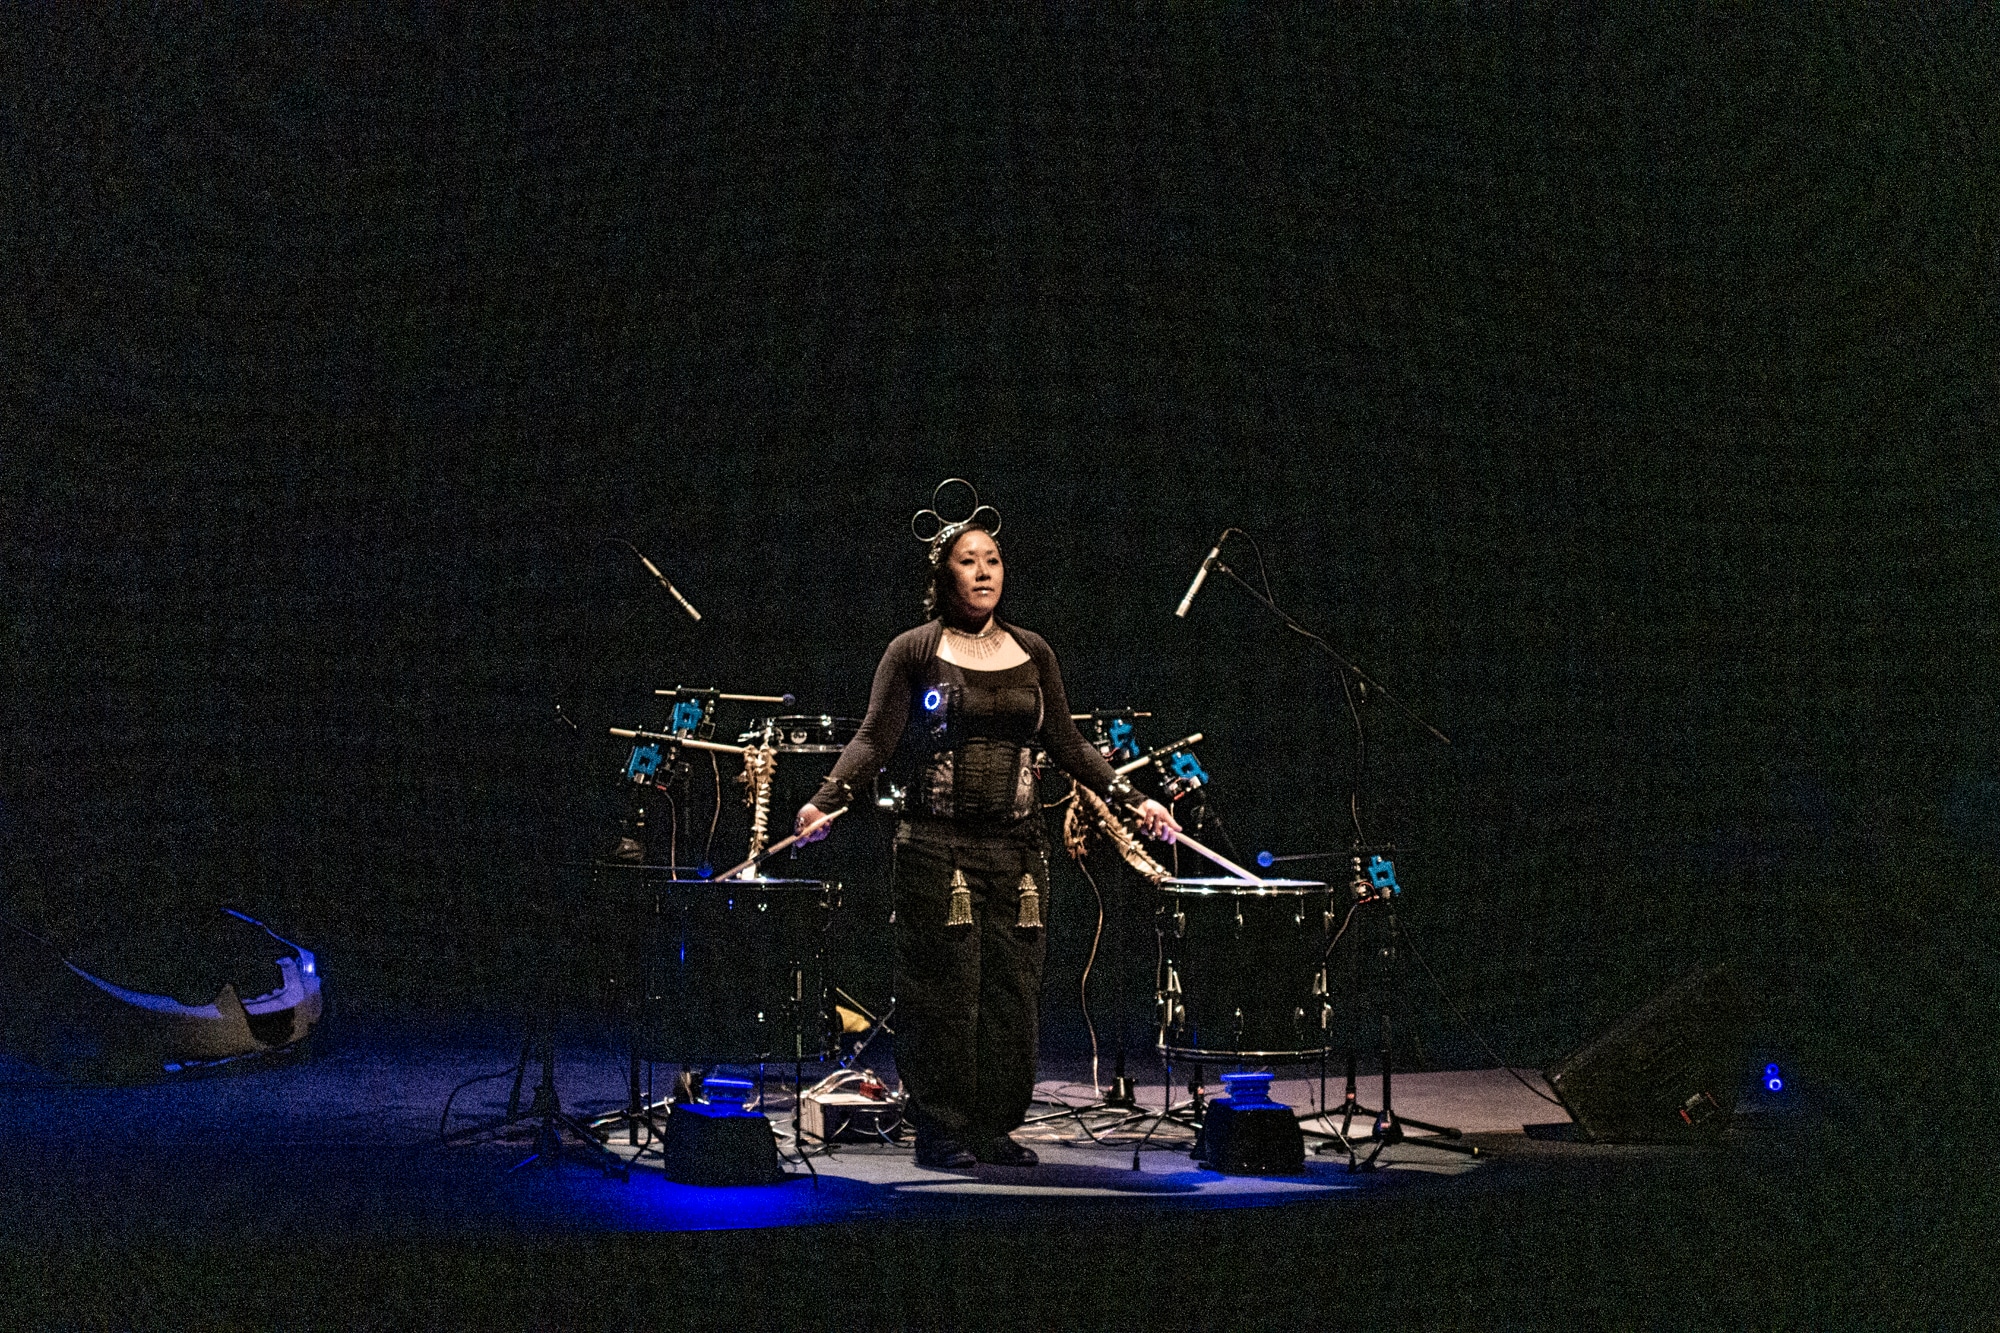 woman performs on drums with digital components